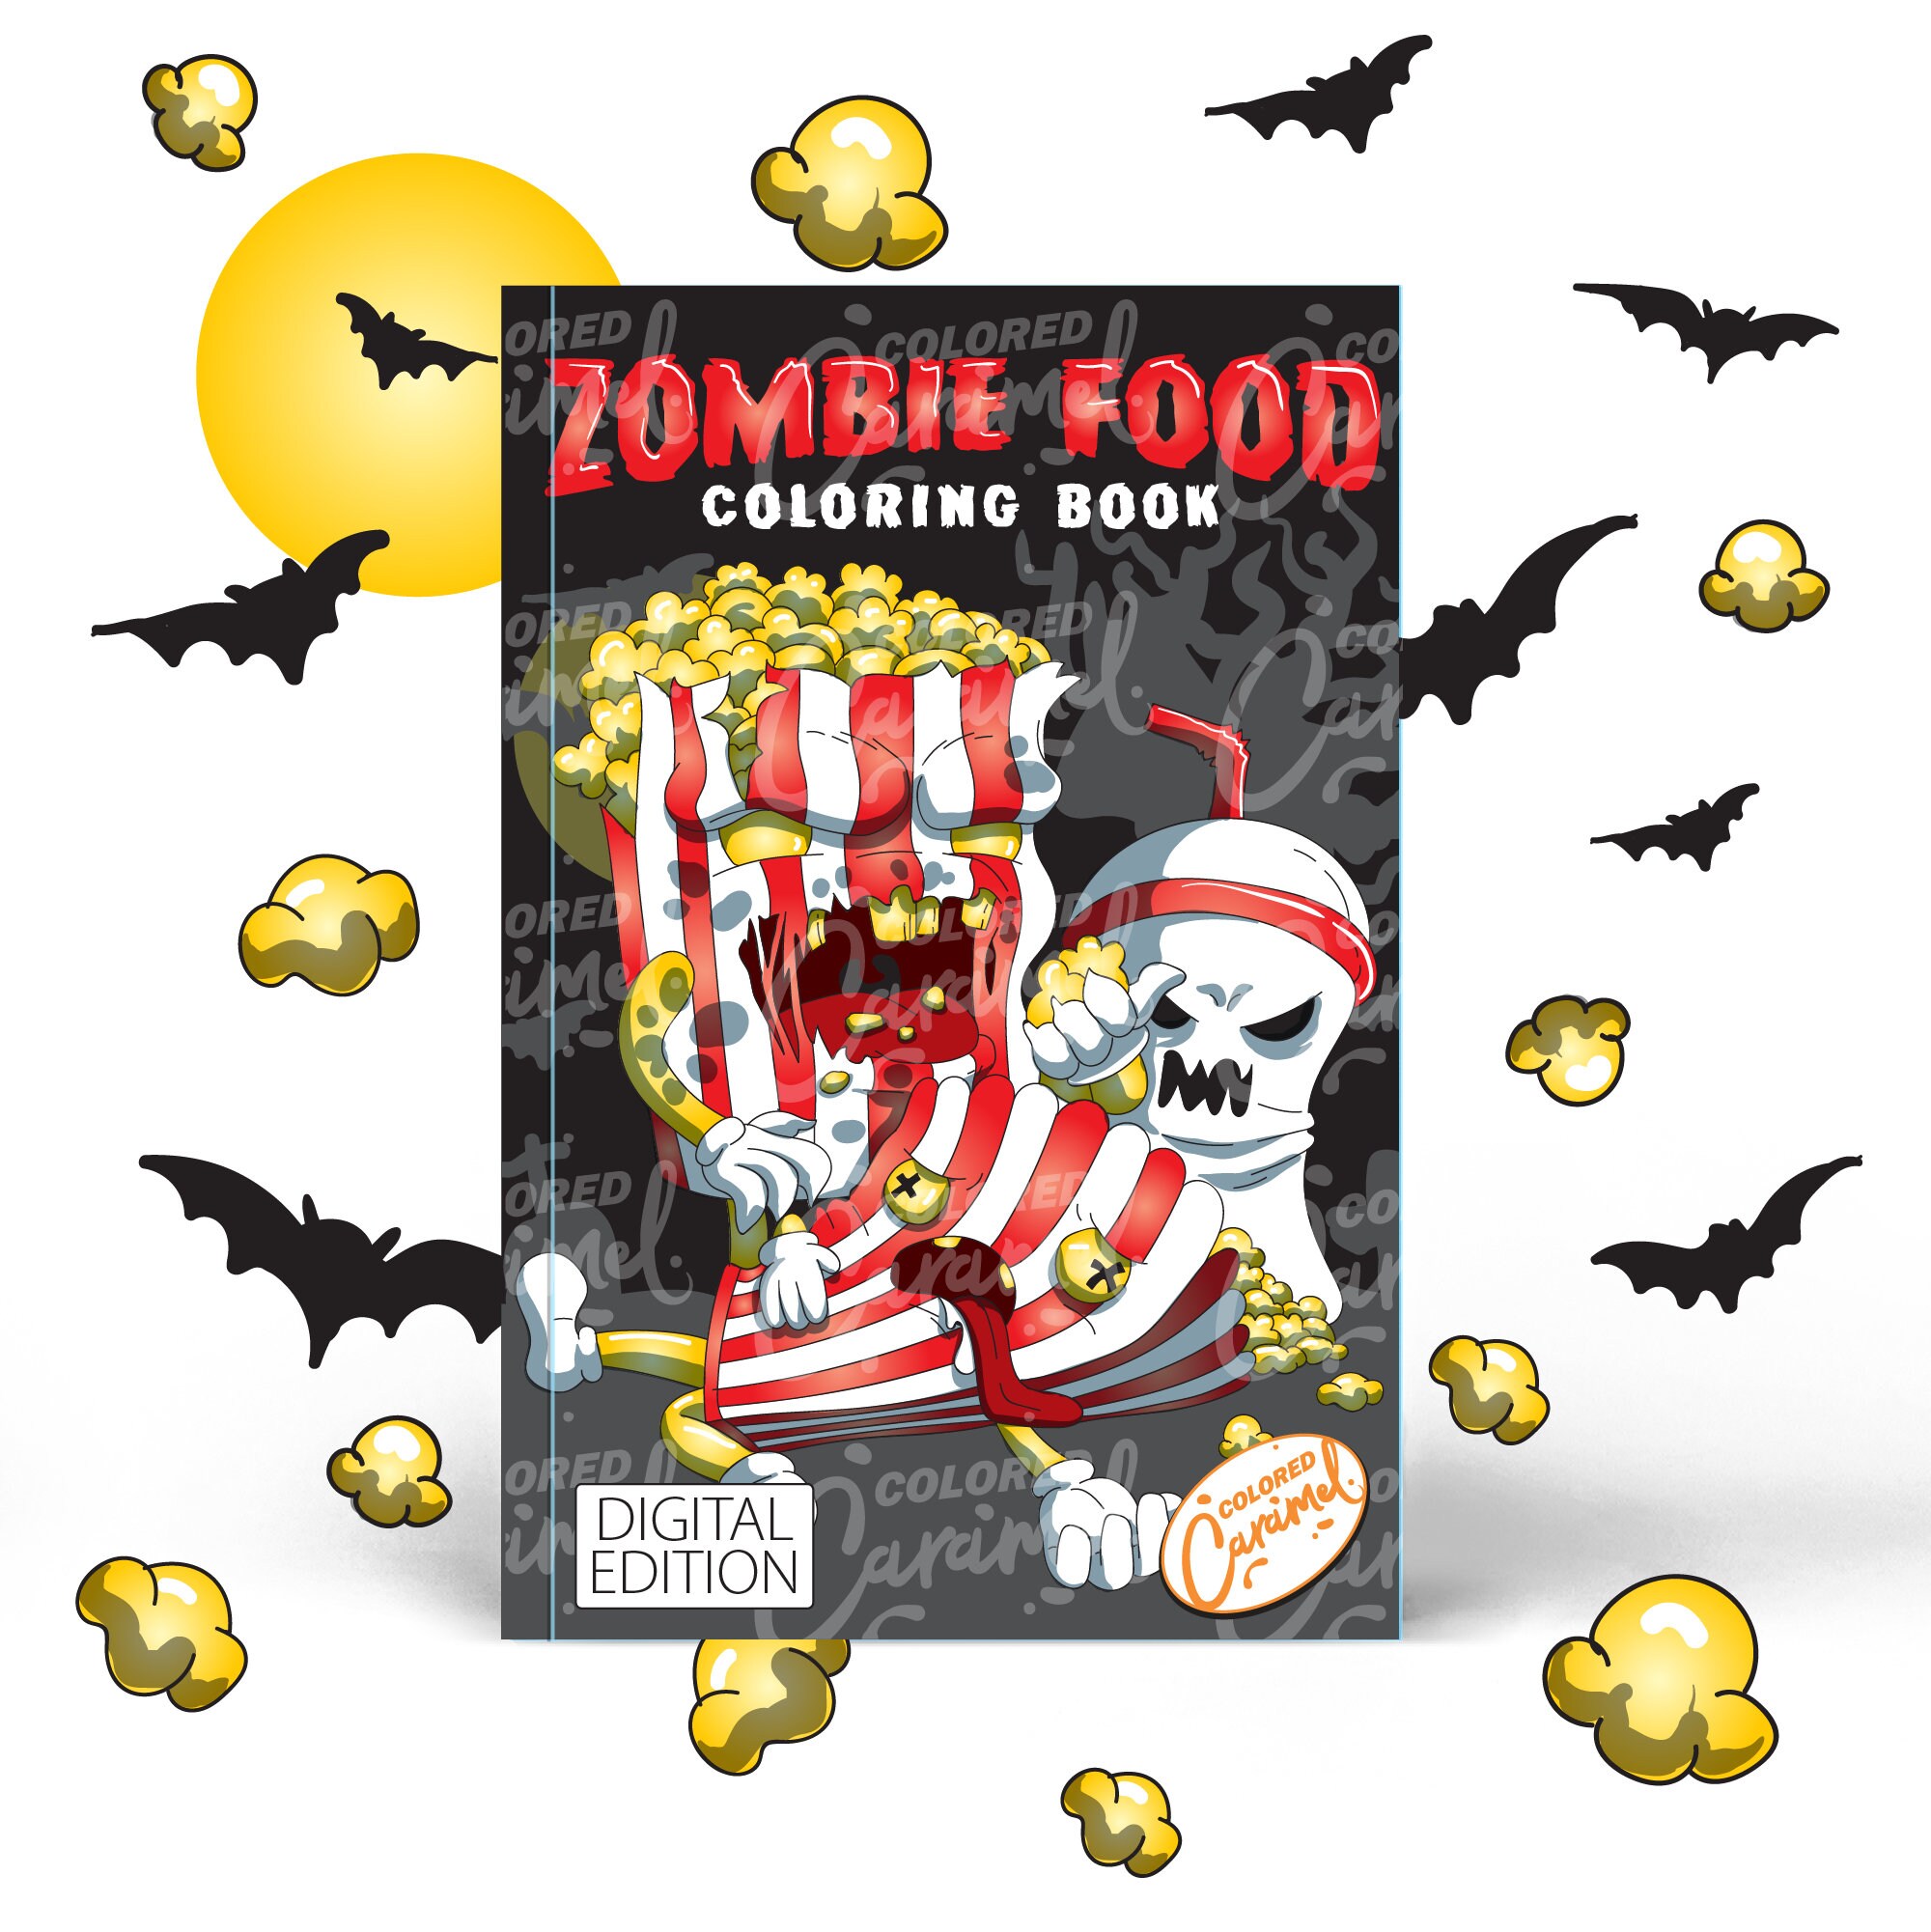 Halloween Zombie Coloring Book, Printable PDF Instant Download Digital Pages to Color, Unique Illustrations with Scary, Horror and Cool Food